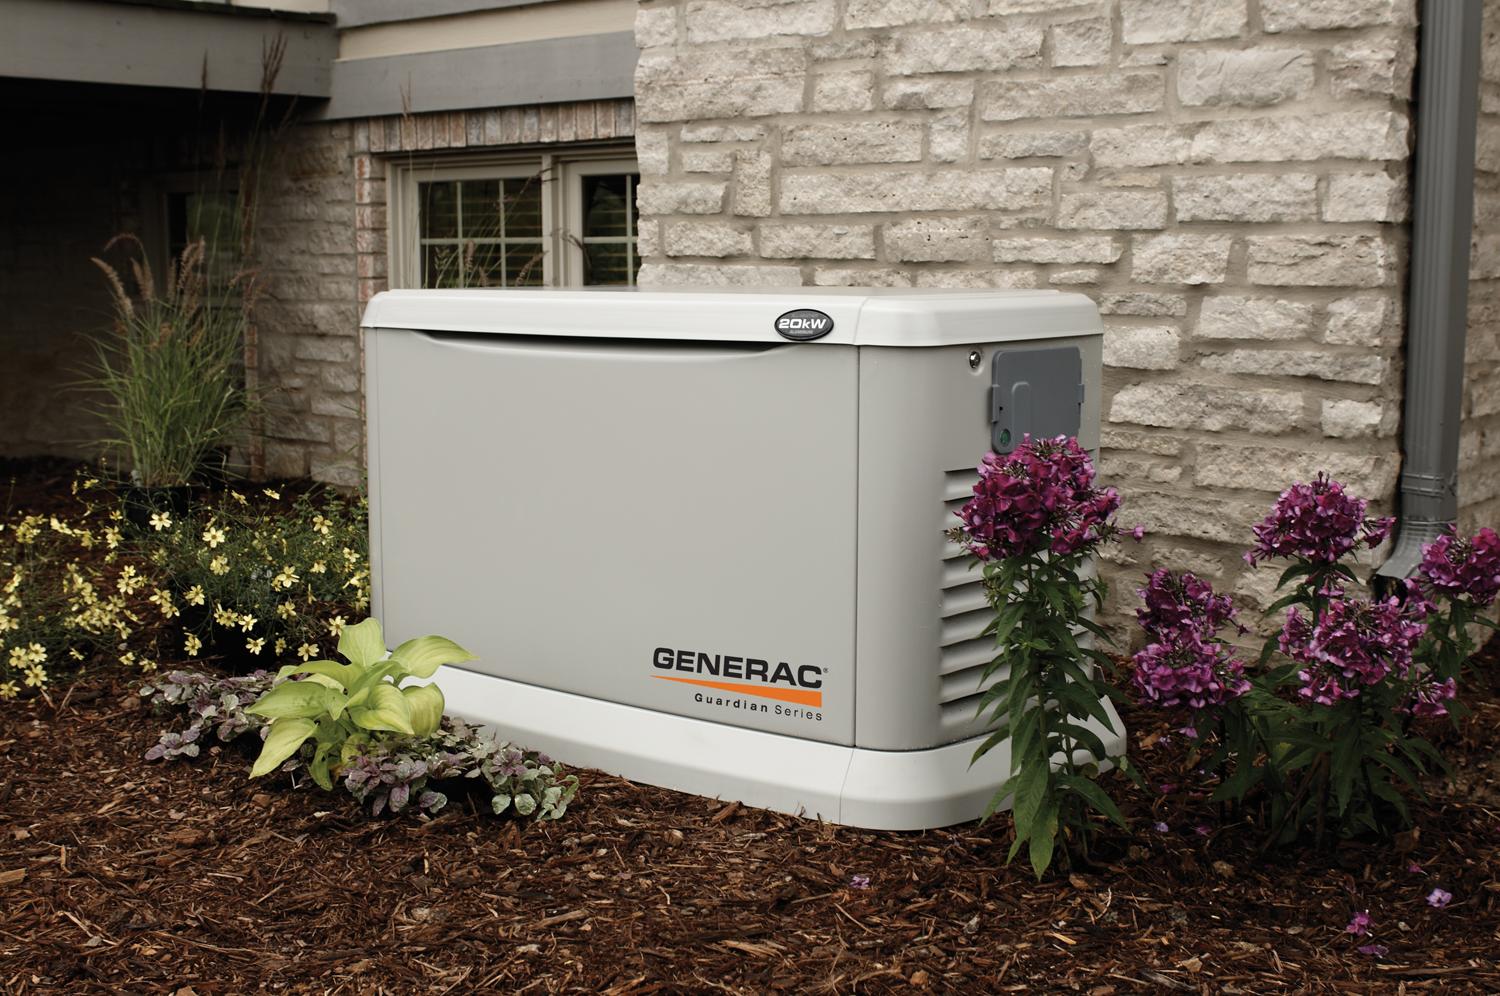 Generac generator outside of a Michigan home surrounded by flowers